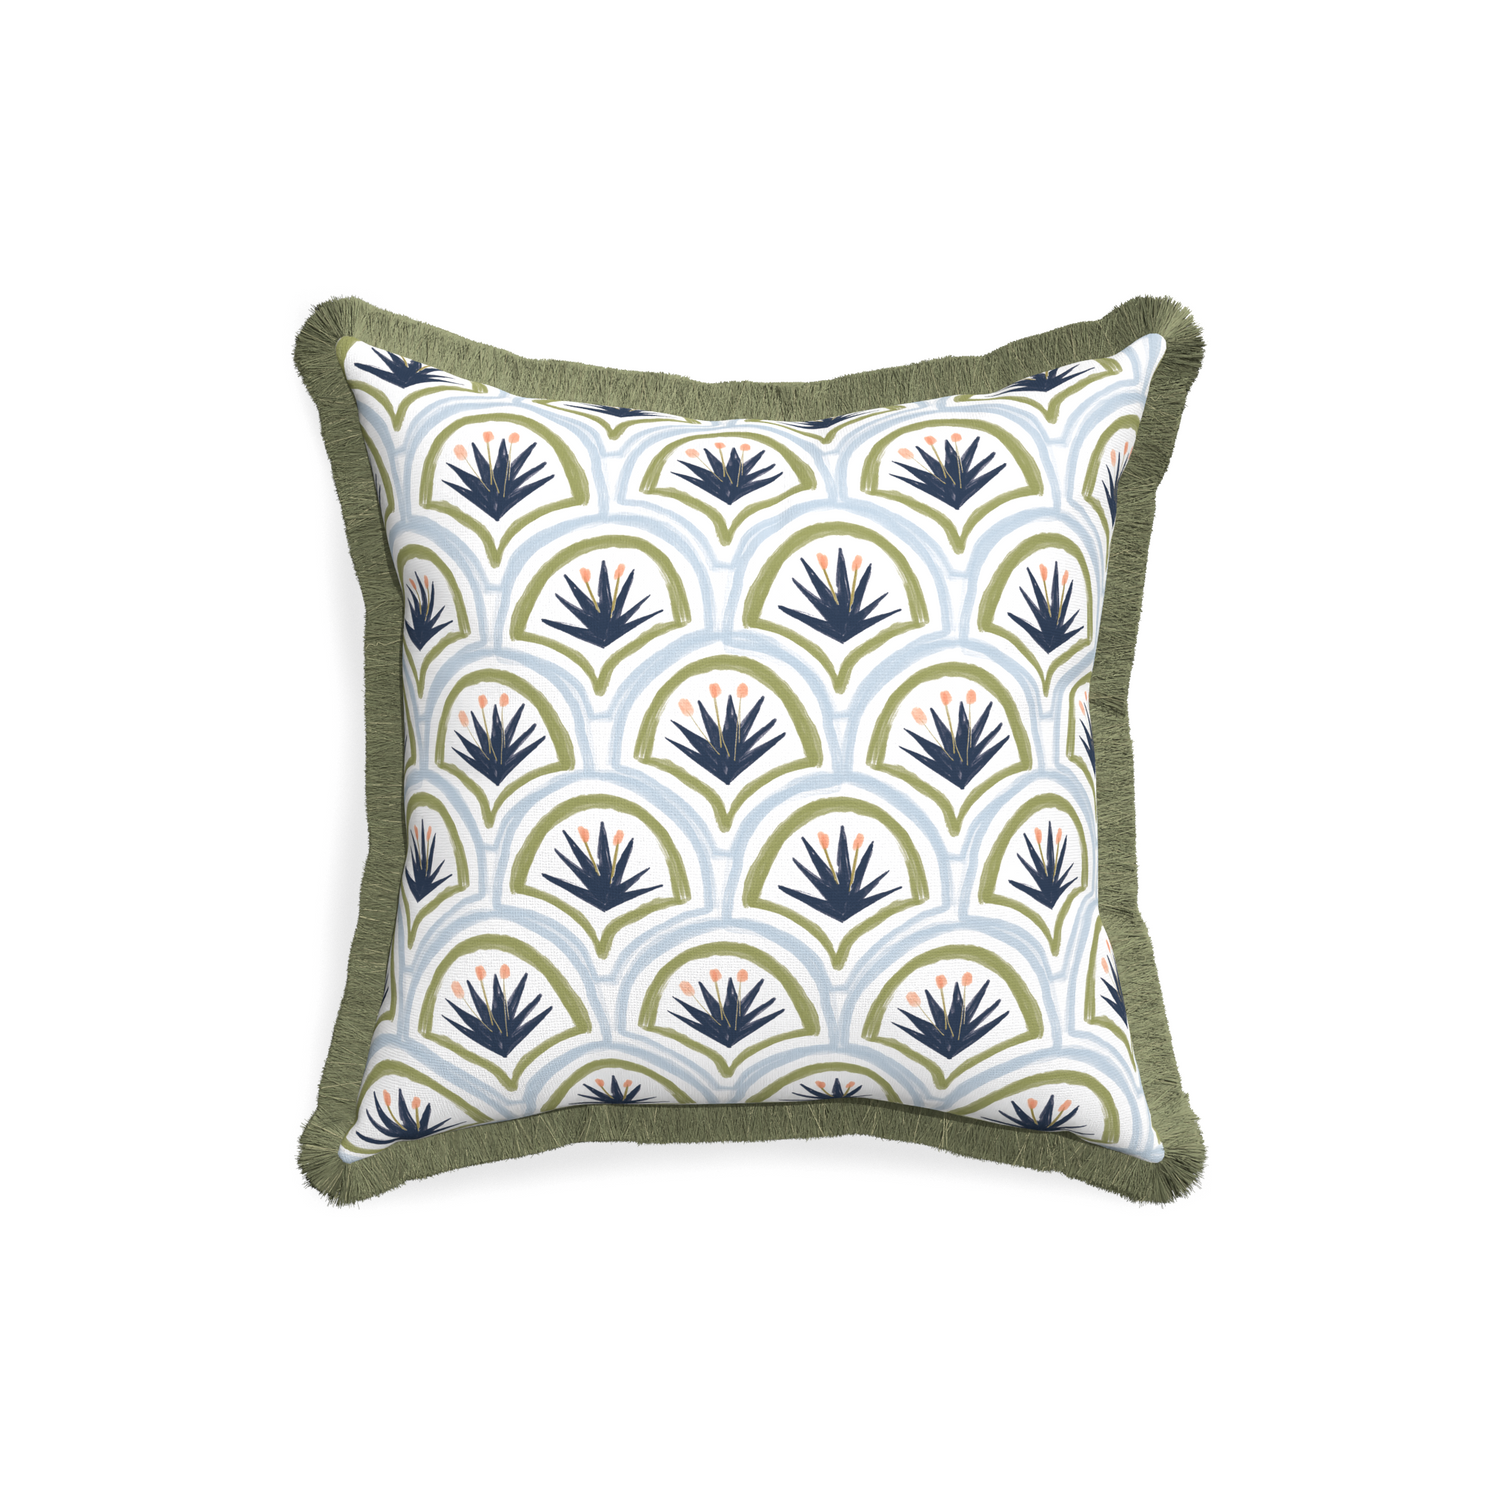 18-square thatcher midnight custom art deco palm patternpillow with sage fringe on white background